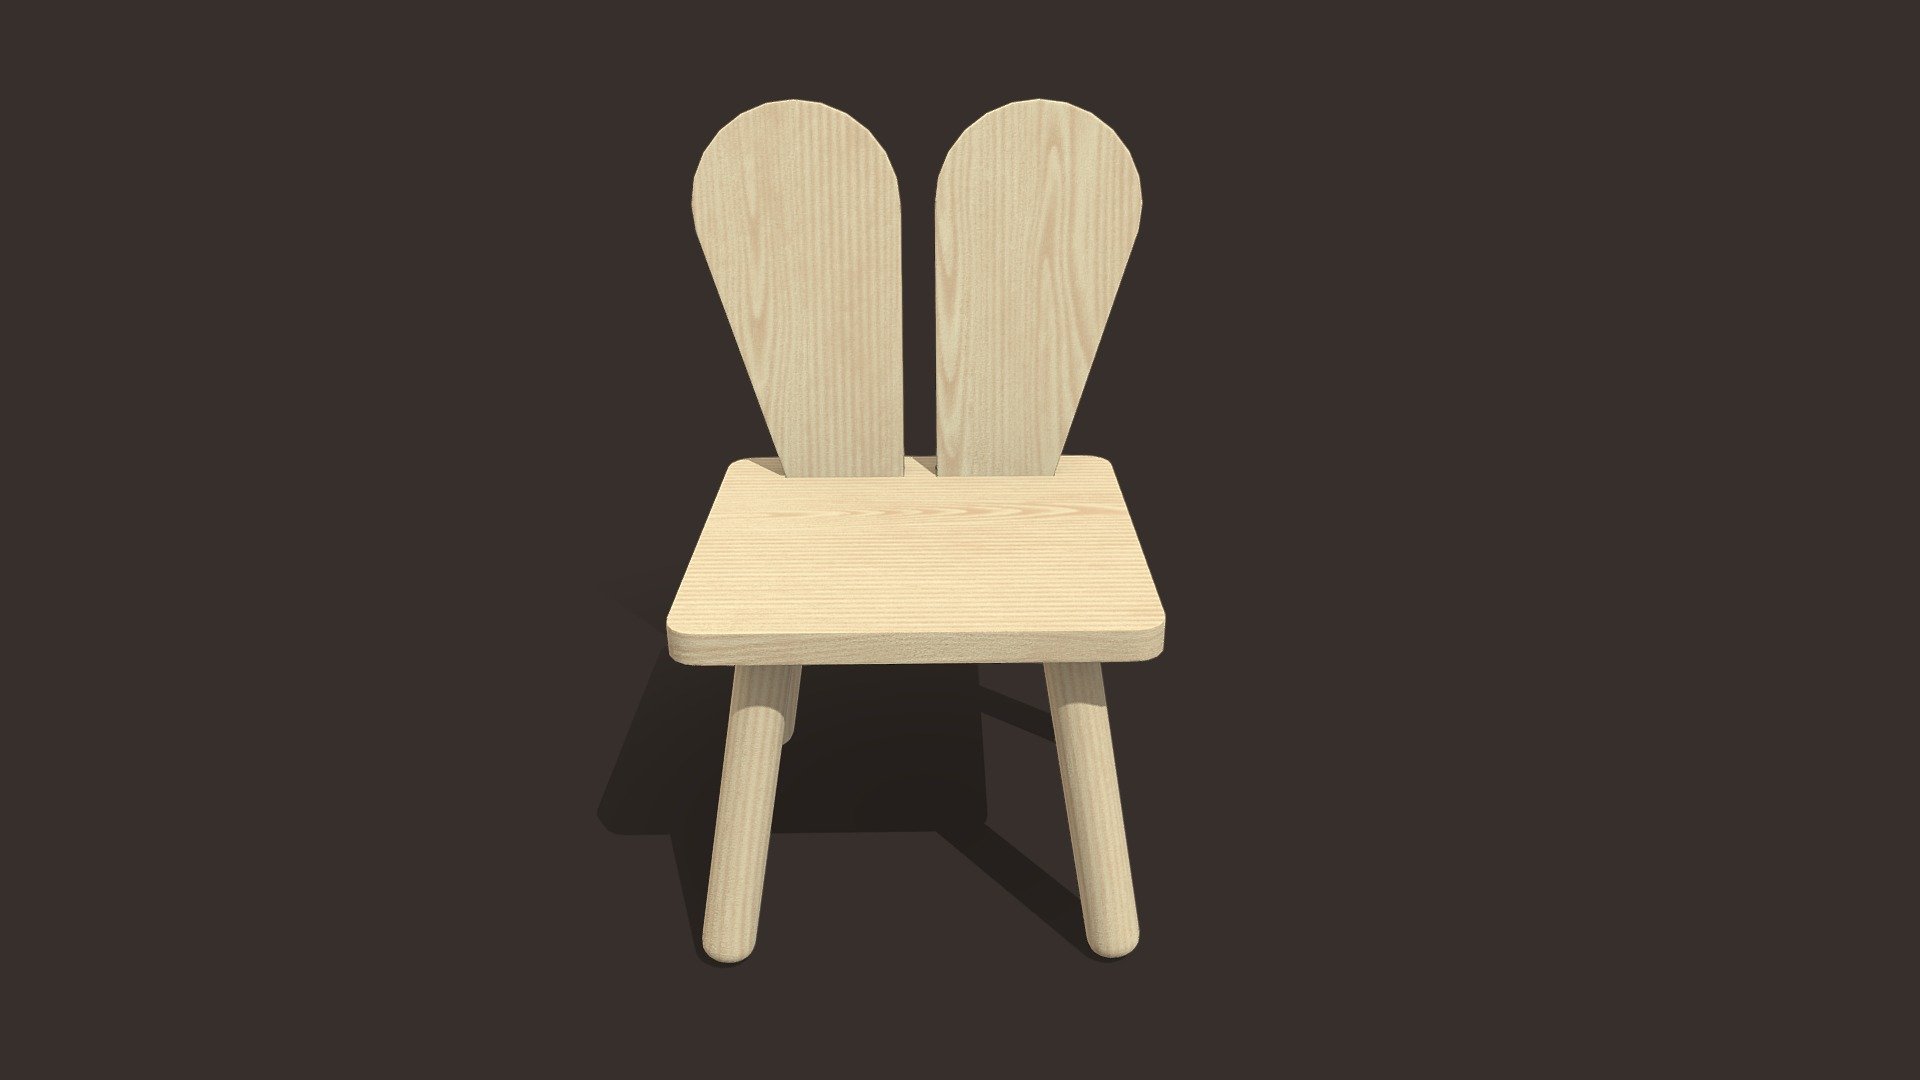 Children chair is a model that will enhance detail and realism to any of your rendering projects. The model has a fully textured, detailed design that allows for close-up renders, and was originally modeled in Blender 3.5, Textured in Substance Painter 2023 and rendered with Adobe Stagier Renders have no post-processing.

Features: -High-quality polygonal model, correctly scaled for an accurate representation of the original object. -The model’s resolutions are optimized for polygon efficiency. -The model is fully textured with all materials applied. -All textures and materials are included and mapped in every format. -No cleaning up necessary just drop your models into the scene and start rendering. -No special plugin needed to open scene.

Measurements: Units: M

File Formats: OBJ FBX

Textures Formats: PNG 4k - Children chair - Buy Royalty Free 3D model by MDgraphicLAB 3d model